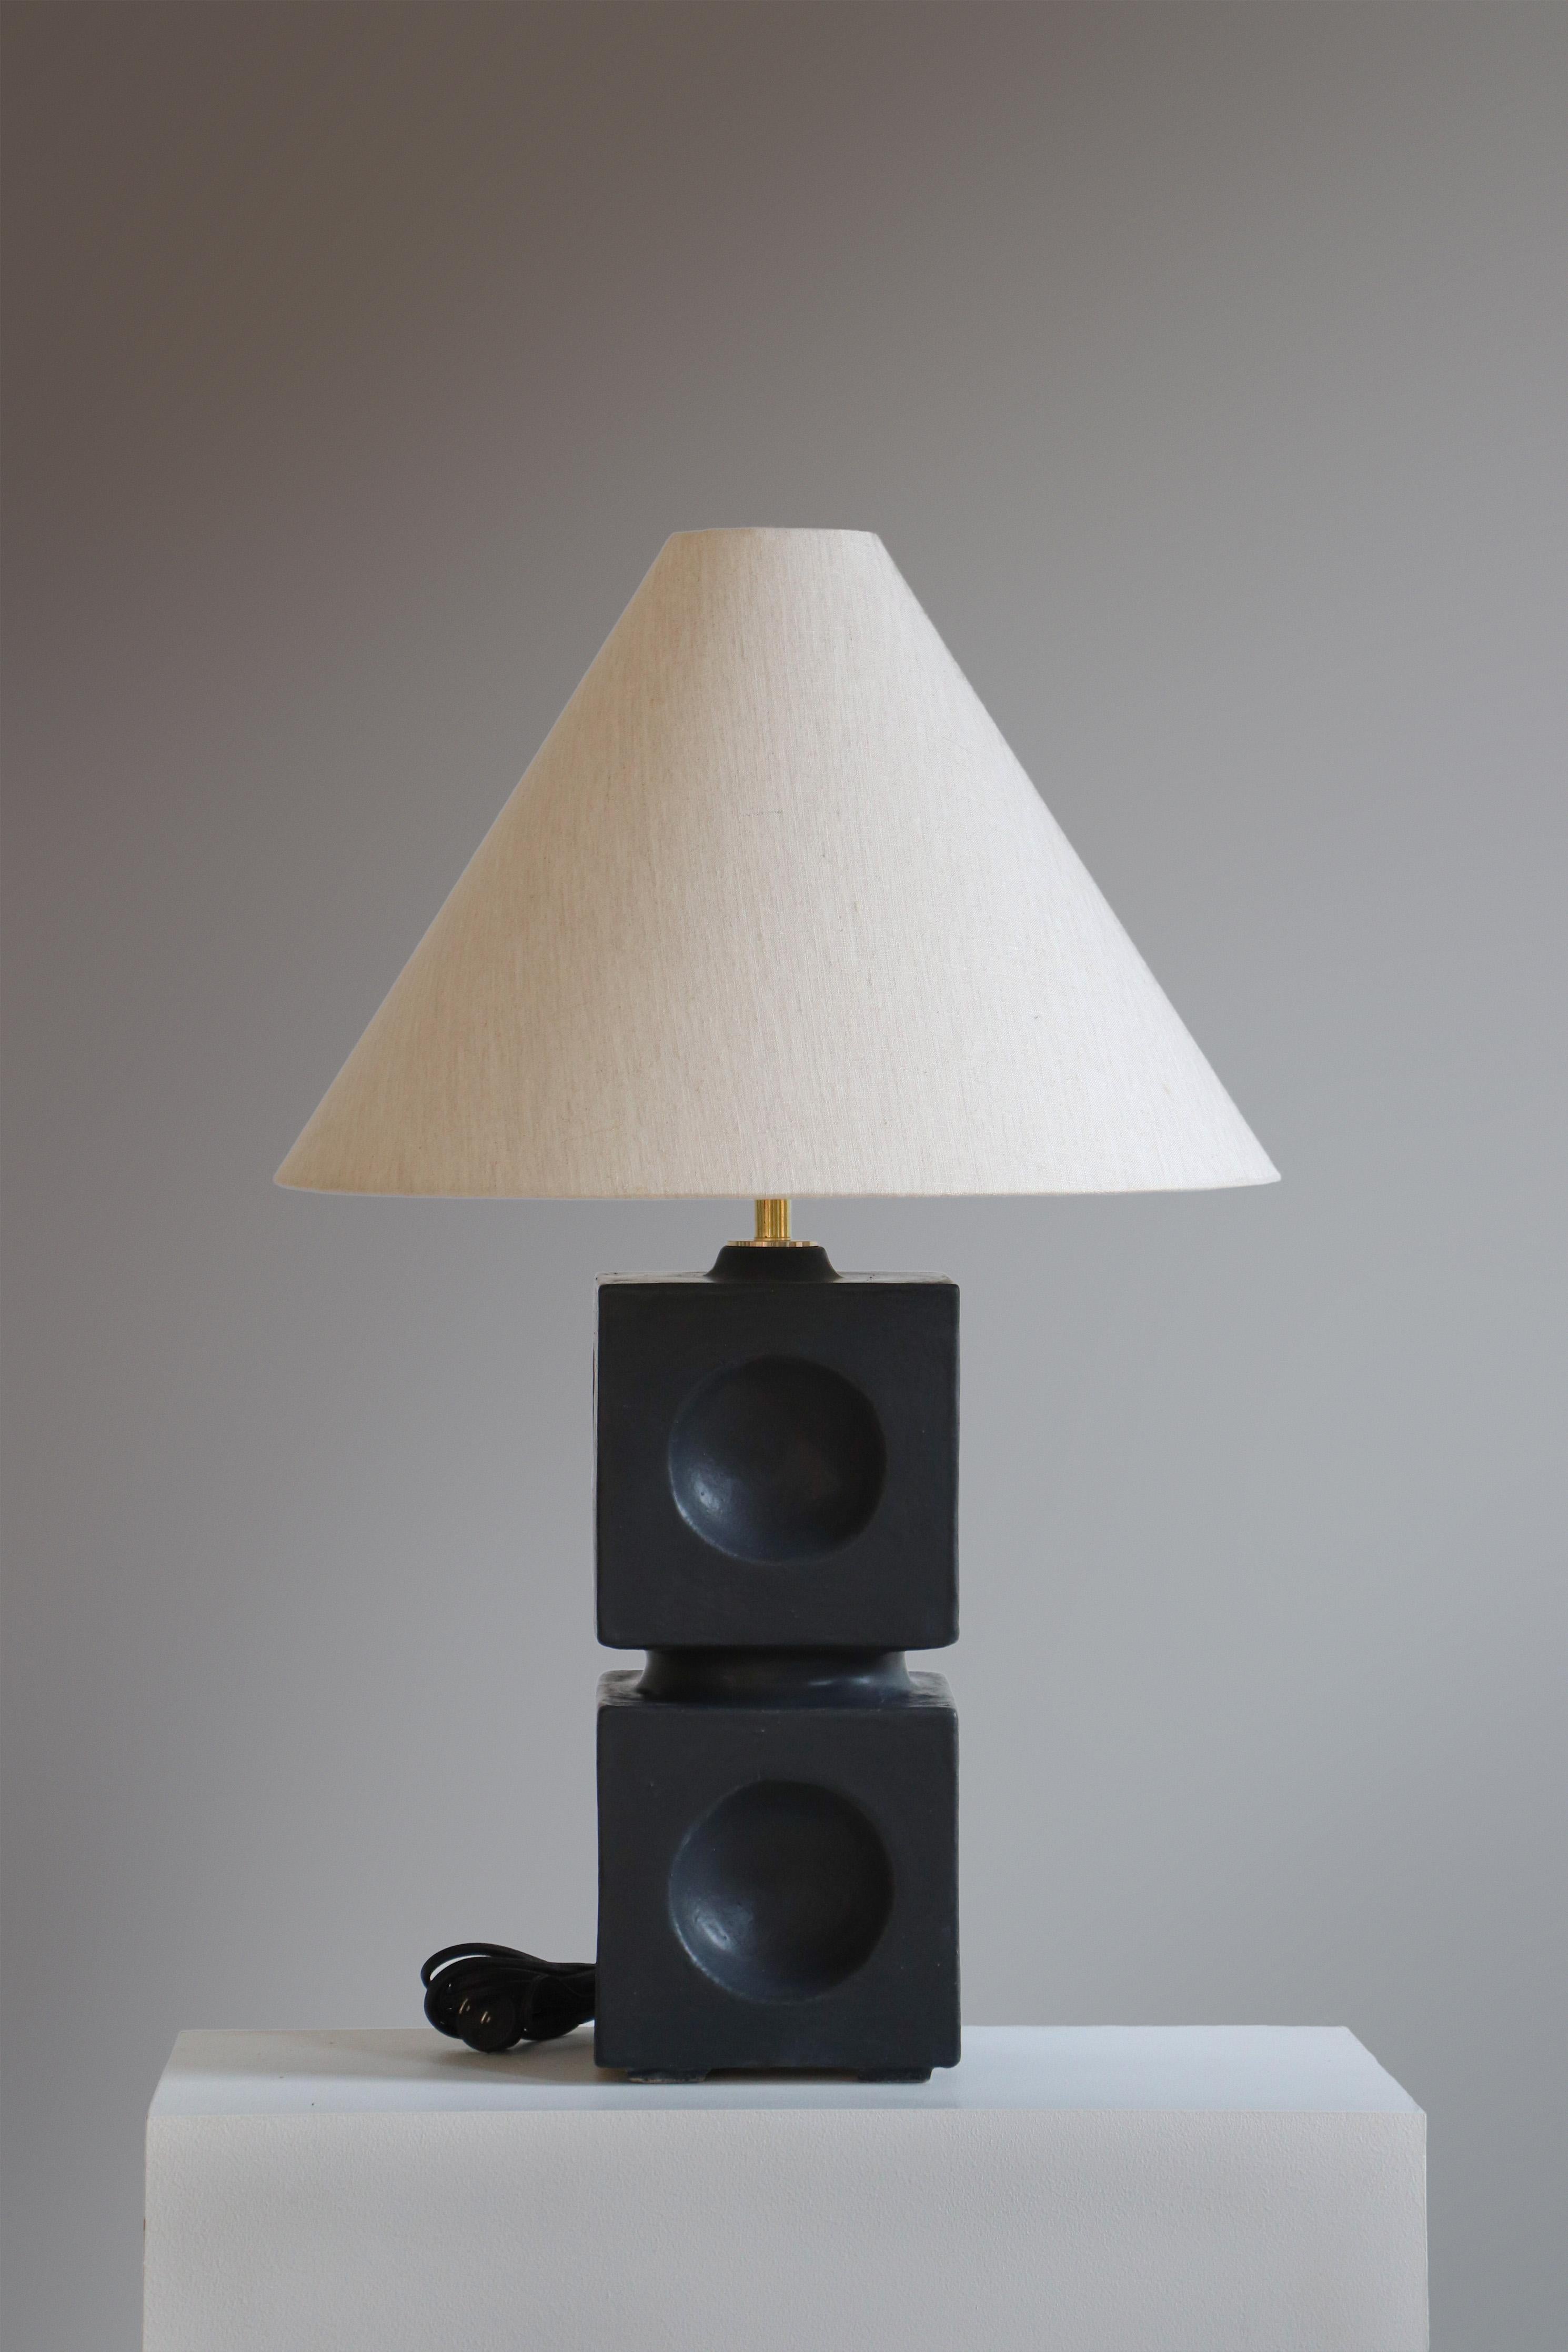 Anthracite Talis II Table Lamp by Danny Kaplan Studio
Dimensions: ⌀ 51 x H 76 cm
Materials: Glazed Ceramic, Unfinished Brass, Wax Paper

This item is handmade, and may exhibit variability within the same piece. We do our best to maintain a